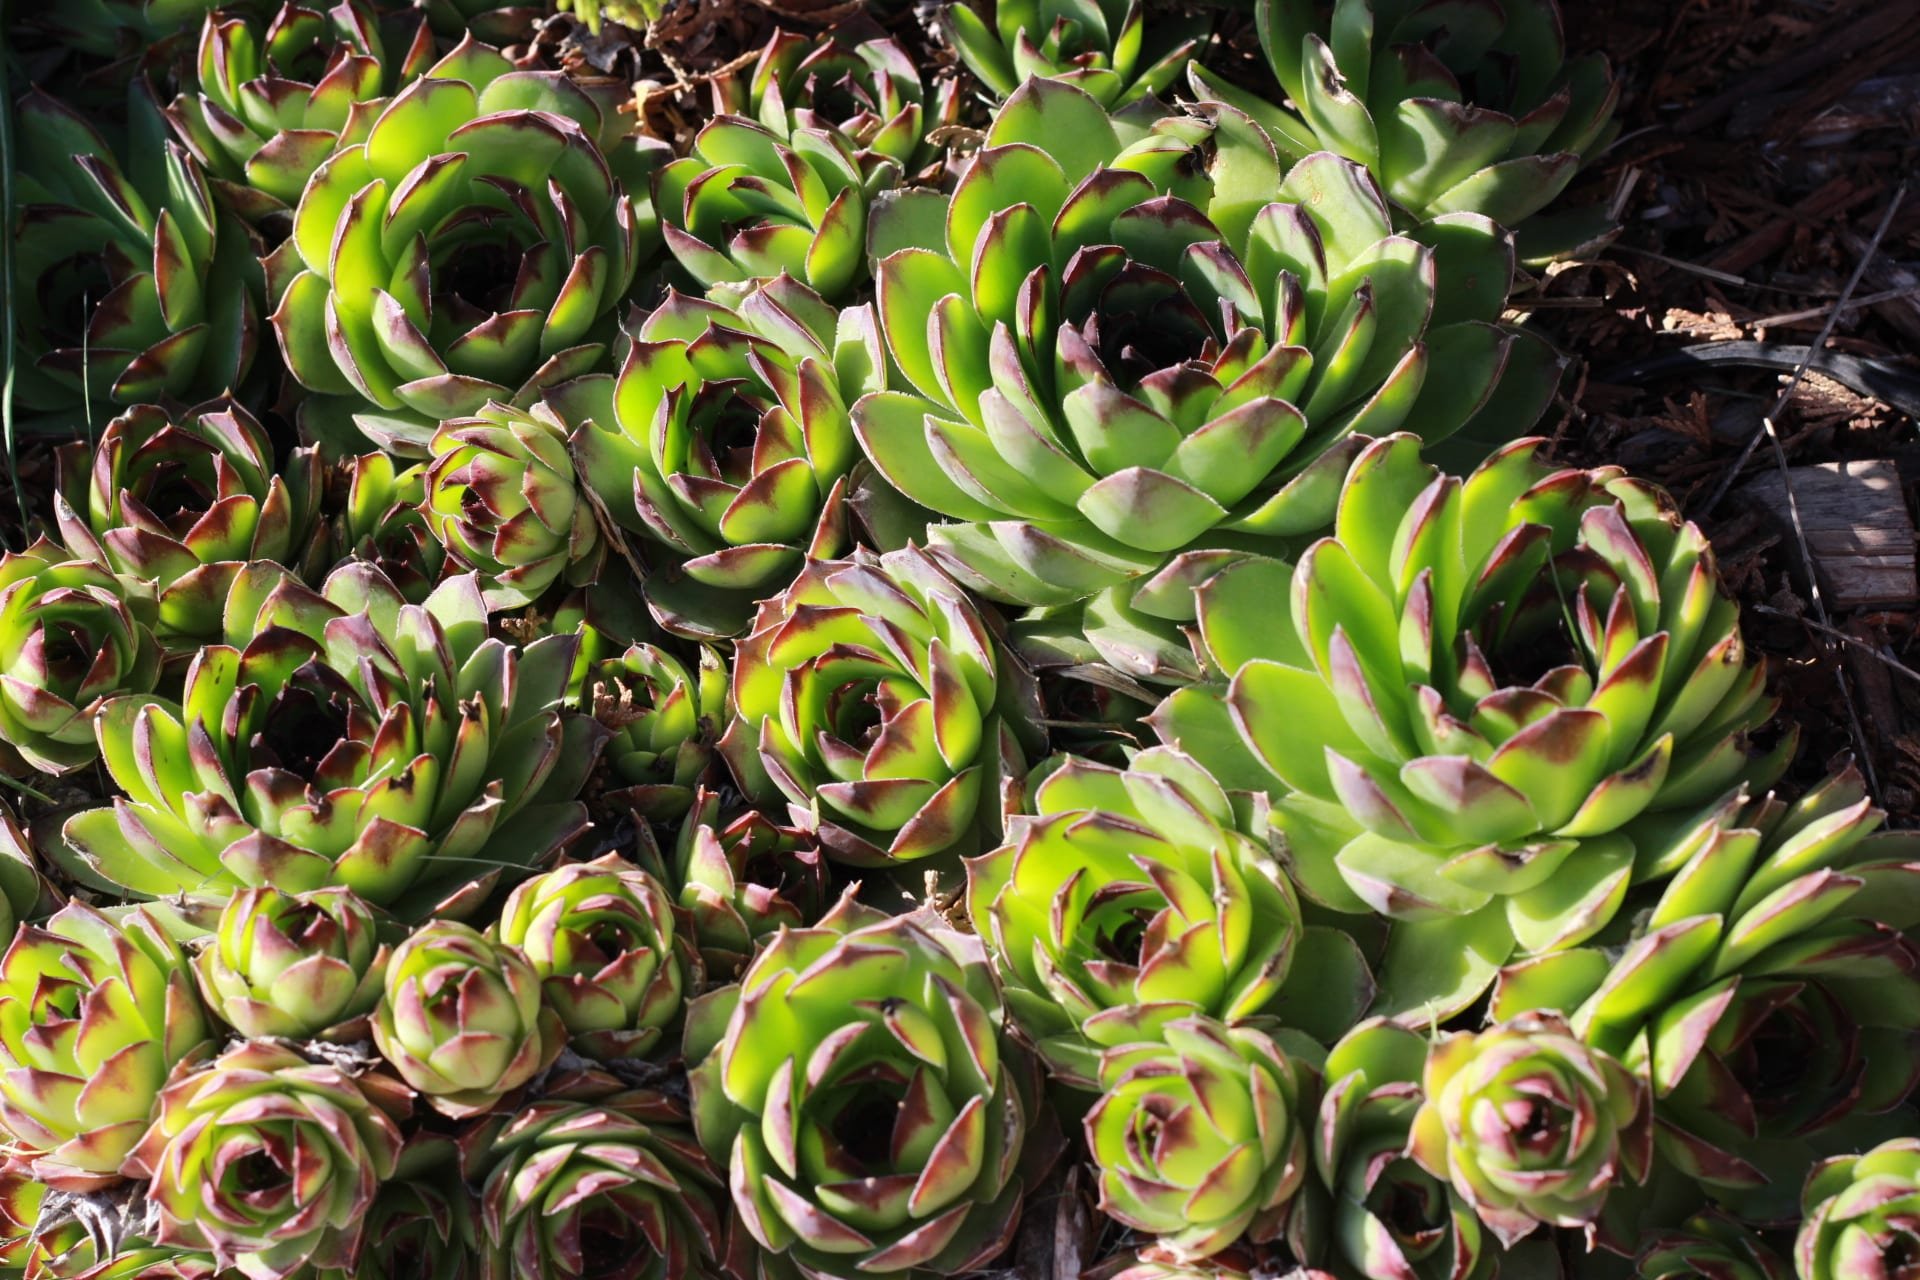 A group of hens and chicks growing closely together.